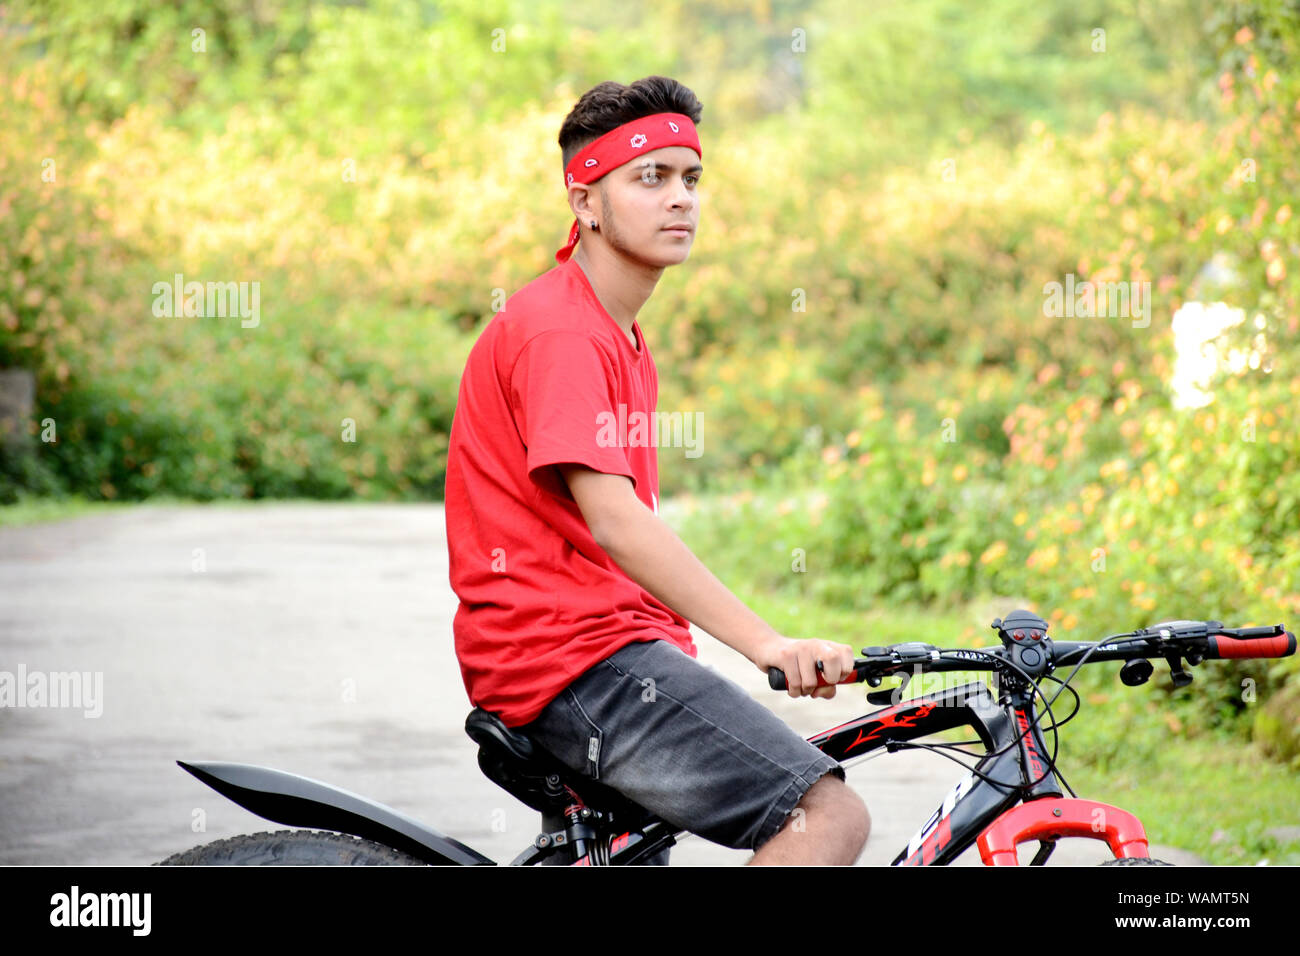 this photograph is good and boy sitting on cycle and natural moment the great style and carry the cycle this photograph background is blurr and green. Stock Photo